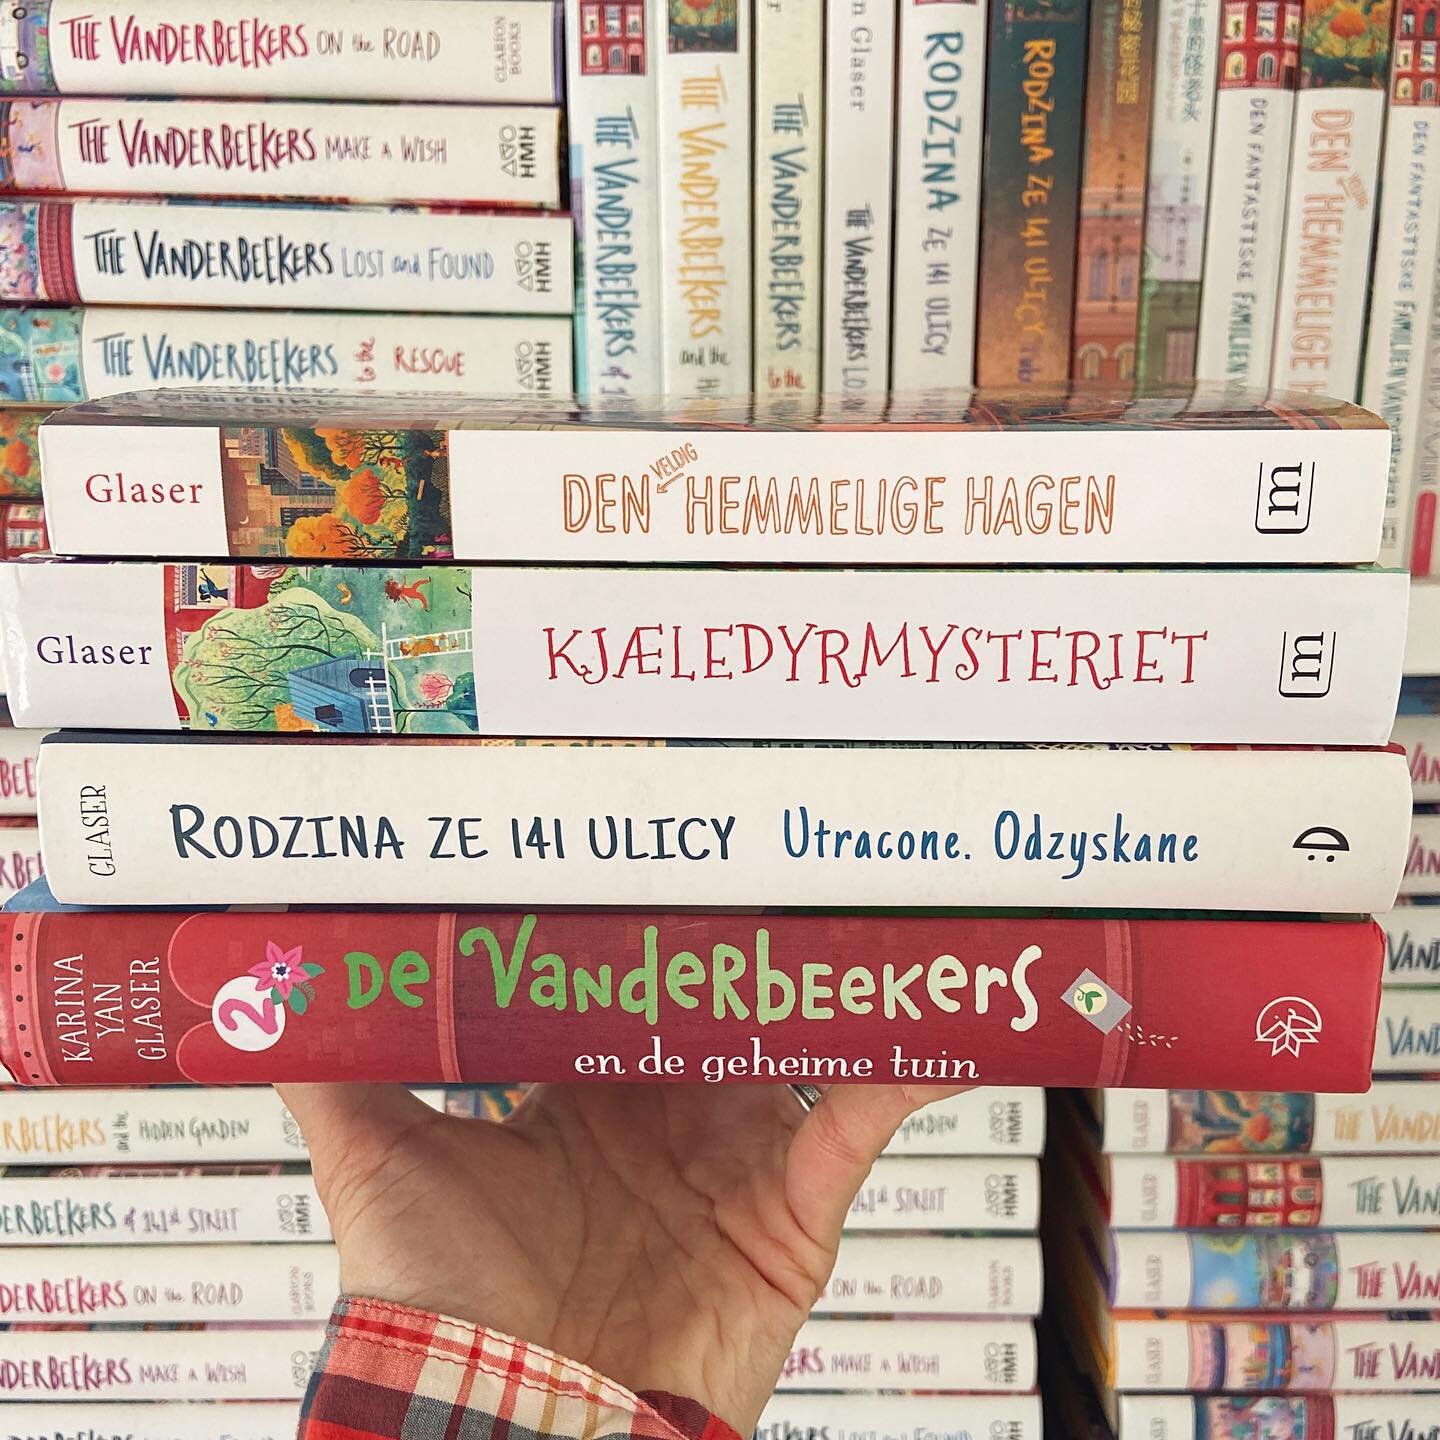 Some newly translated Vanderbeeker books to add to the bookshelf! Here&rsquo;s Norwegian, Polish, and Dutch. Many thanks to the translators and publishers! ❤️ Thank you, @harperkids and @clarkliterary ! 💕